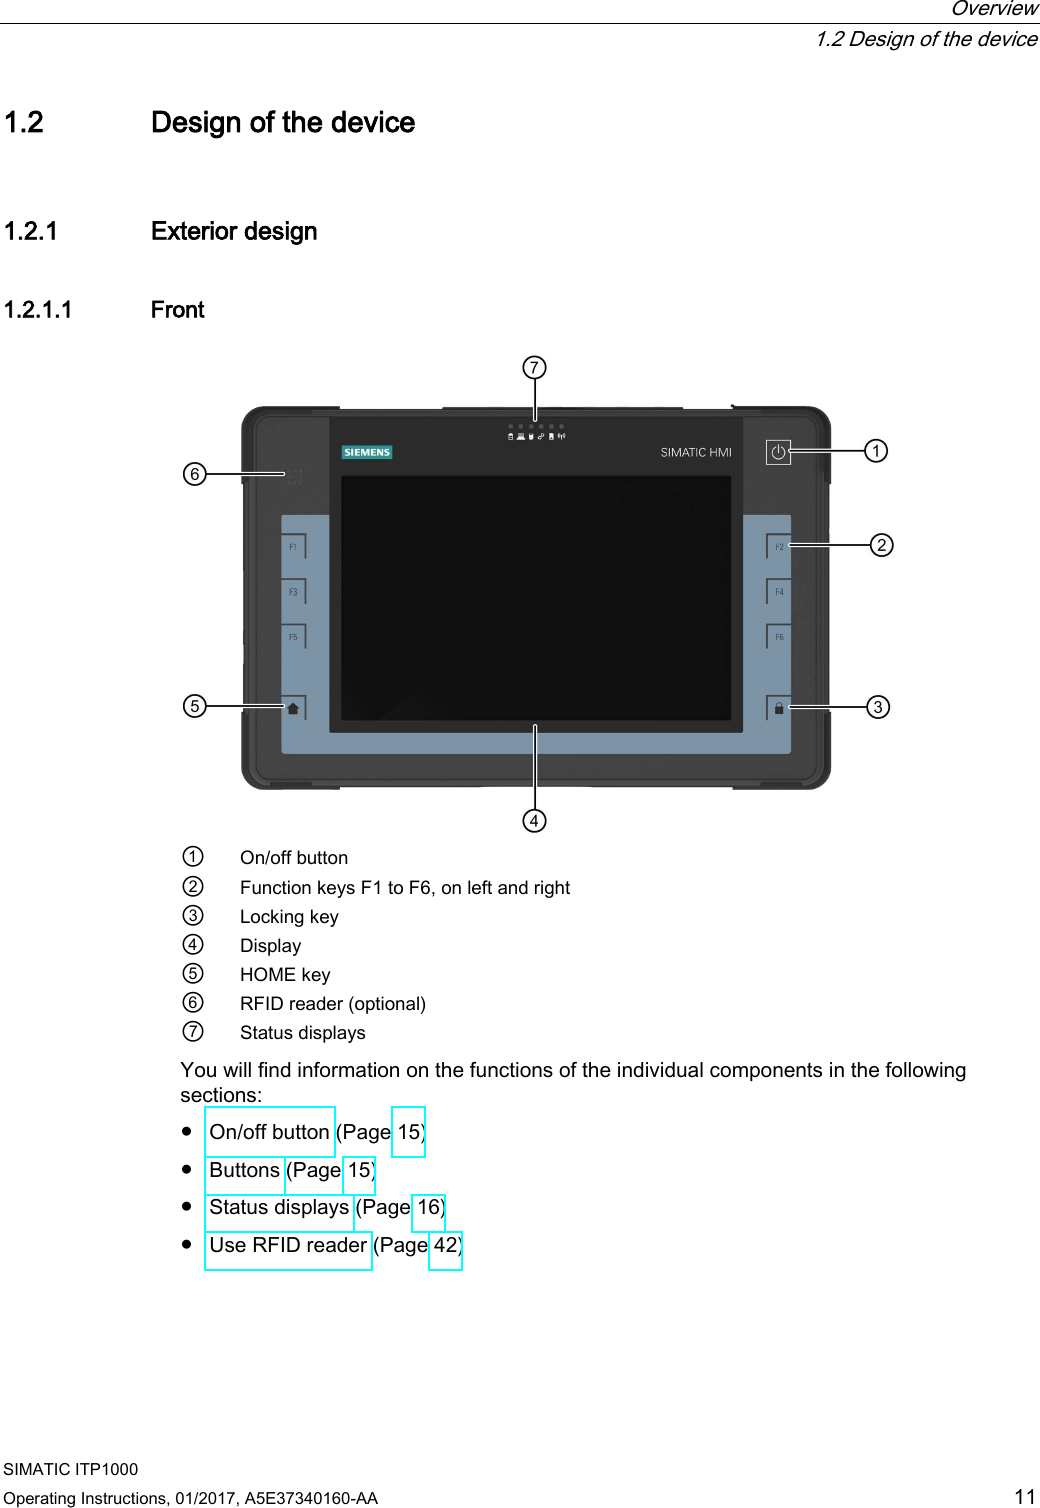  Overview  1.2 Design of the device SIMATIC ITP1000 Operating Instructions, 01/2017, A5E37340160-AA  11 1.2 Design of the device 1.2.1 Exterior design 1.2.1.1 Front  ① On/off button ② Function keys F1 to F6, on left and right ③ Locking key ④ Display ⑤ HOME key ⑥ RFID reader (optional) ⑦ Status displays You will find information on the functions of the individual components in the following sections: ● On/off button (Page 15) ● Buttons (Page 15) ● Status displays (Page 16) ● Use RFID reader (Page 42) 